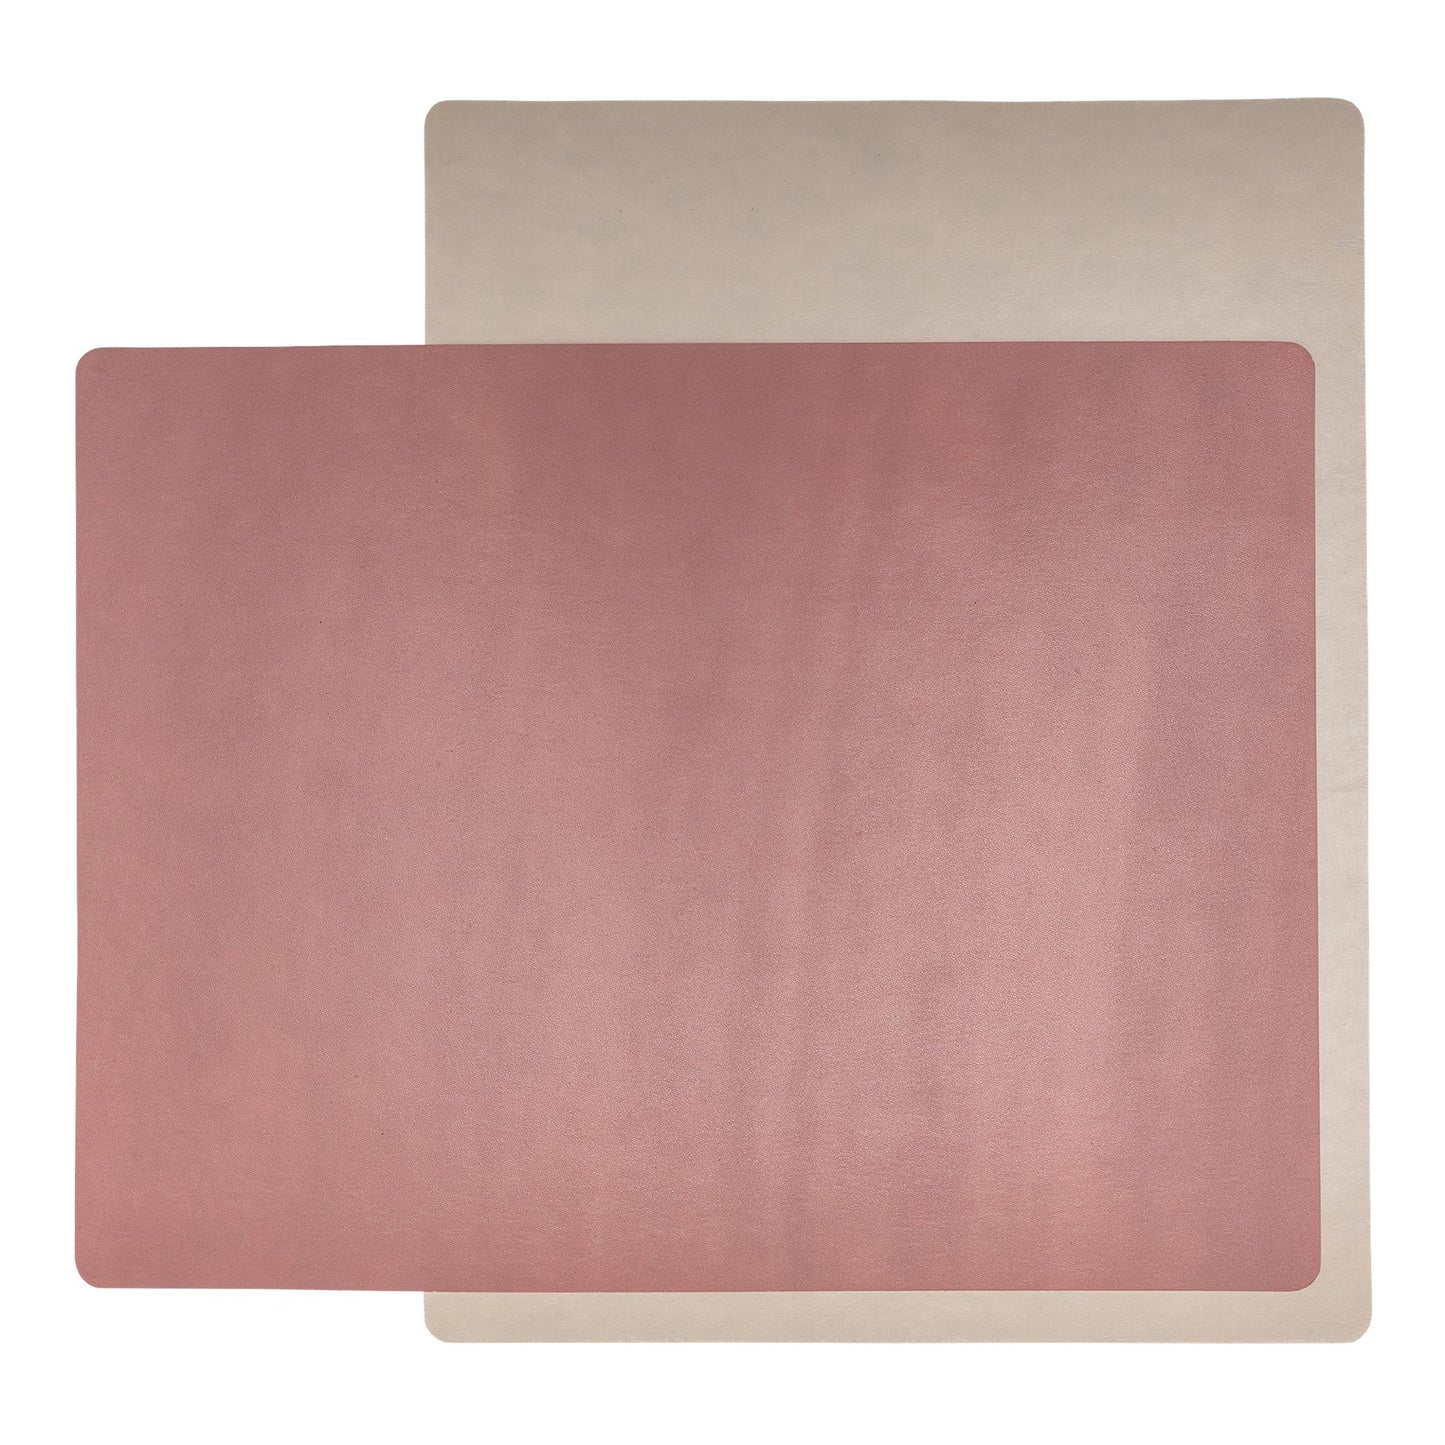 Two rectangular washable paper placemats are stacked one on top of the other. The one in the foreground is pink and the one at rear is beige.